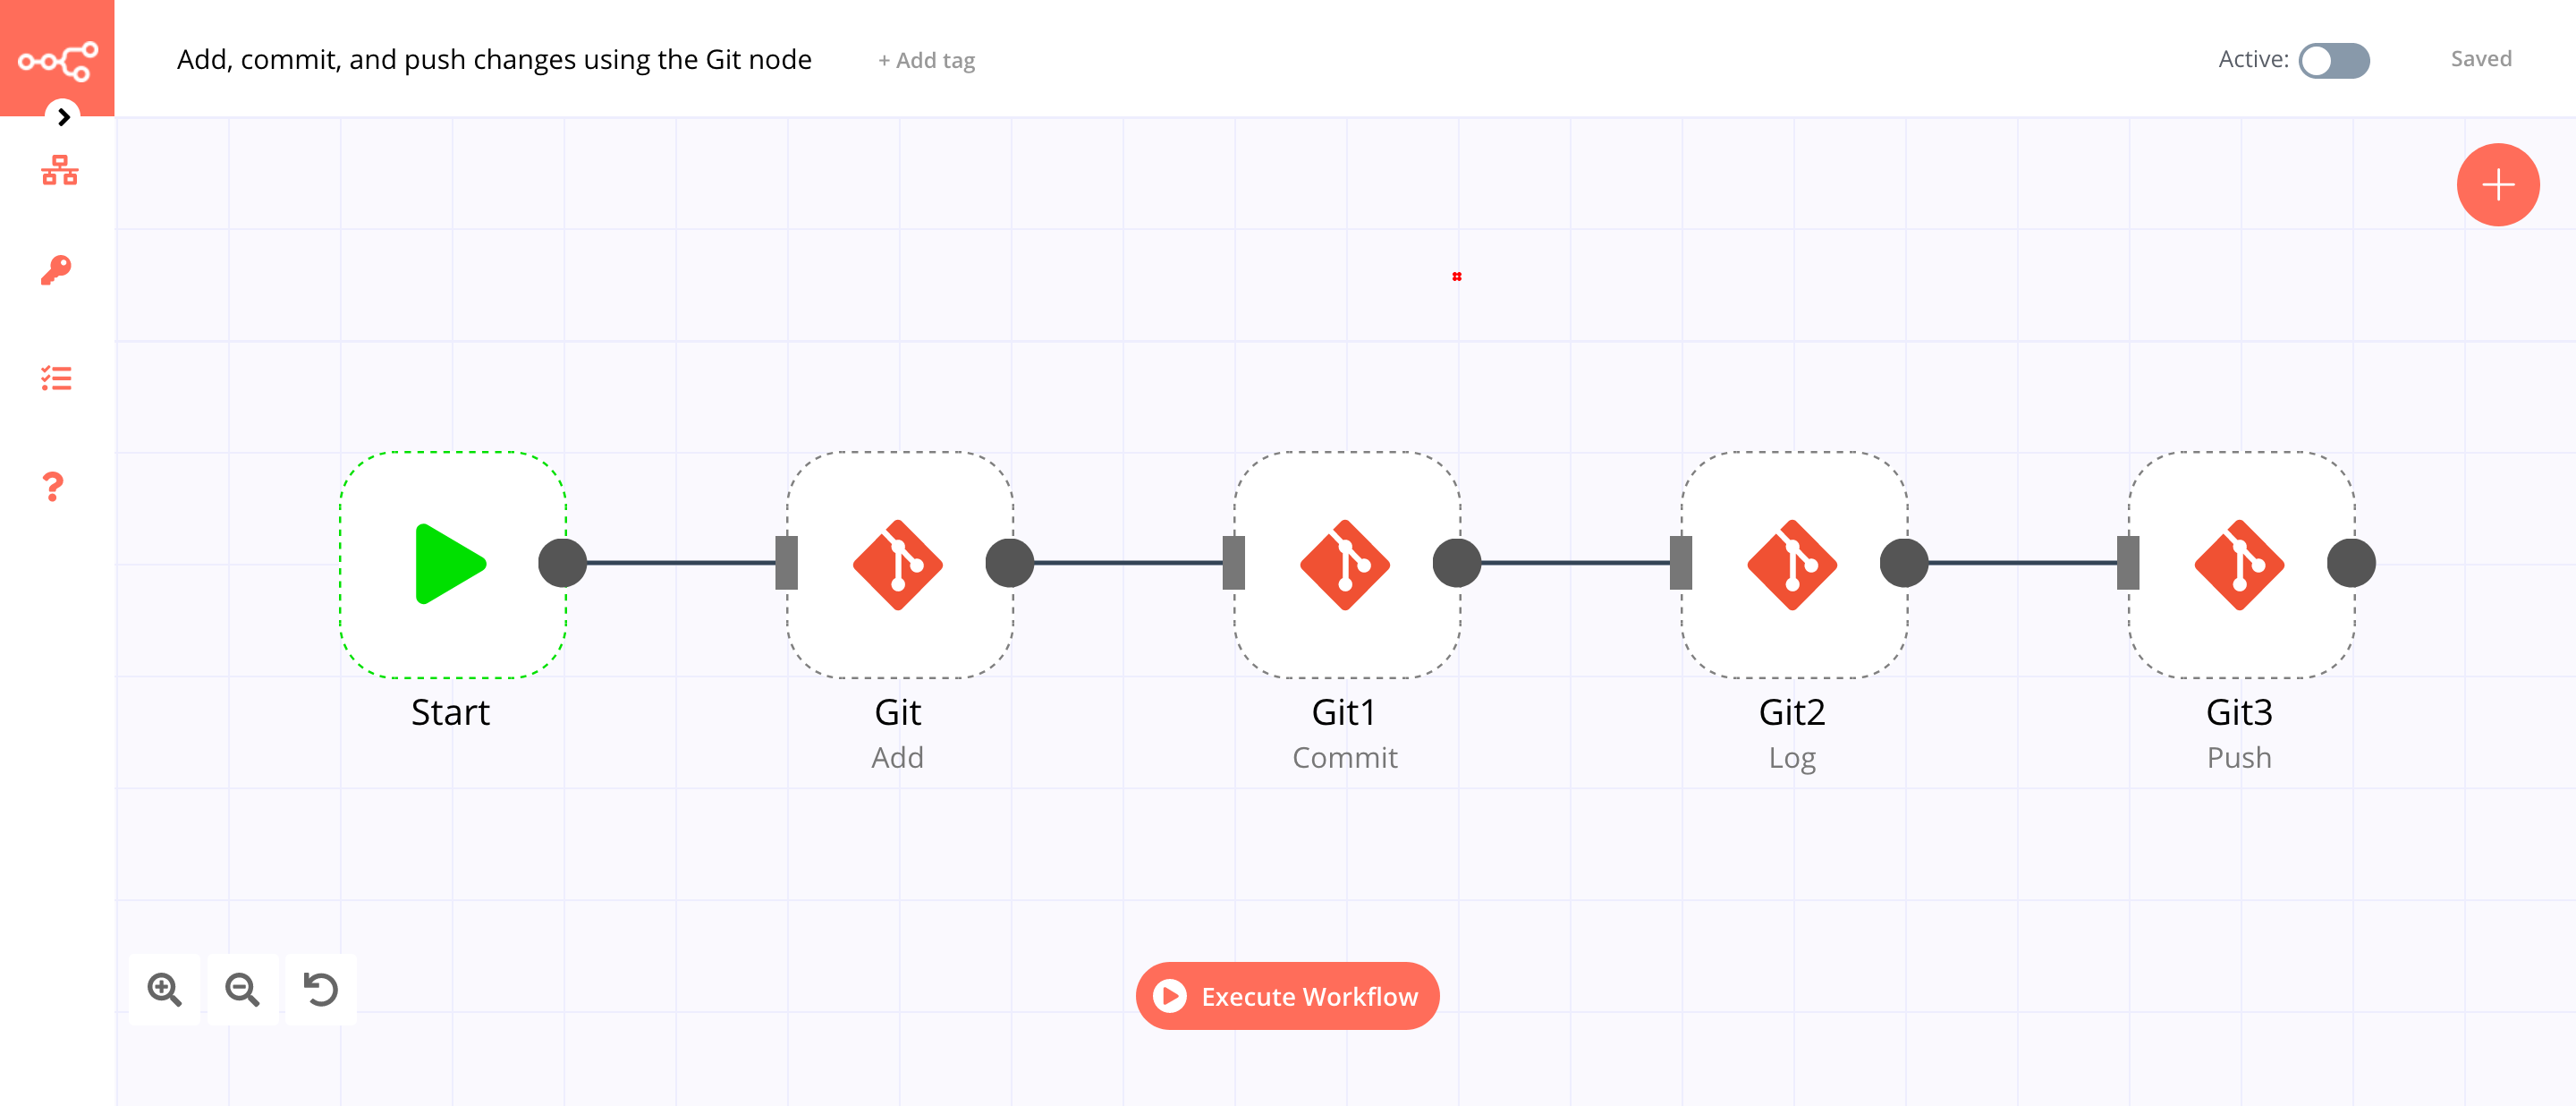 A workflow with the Git node